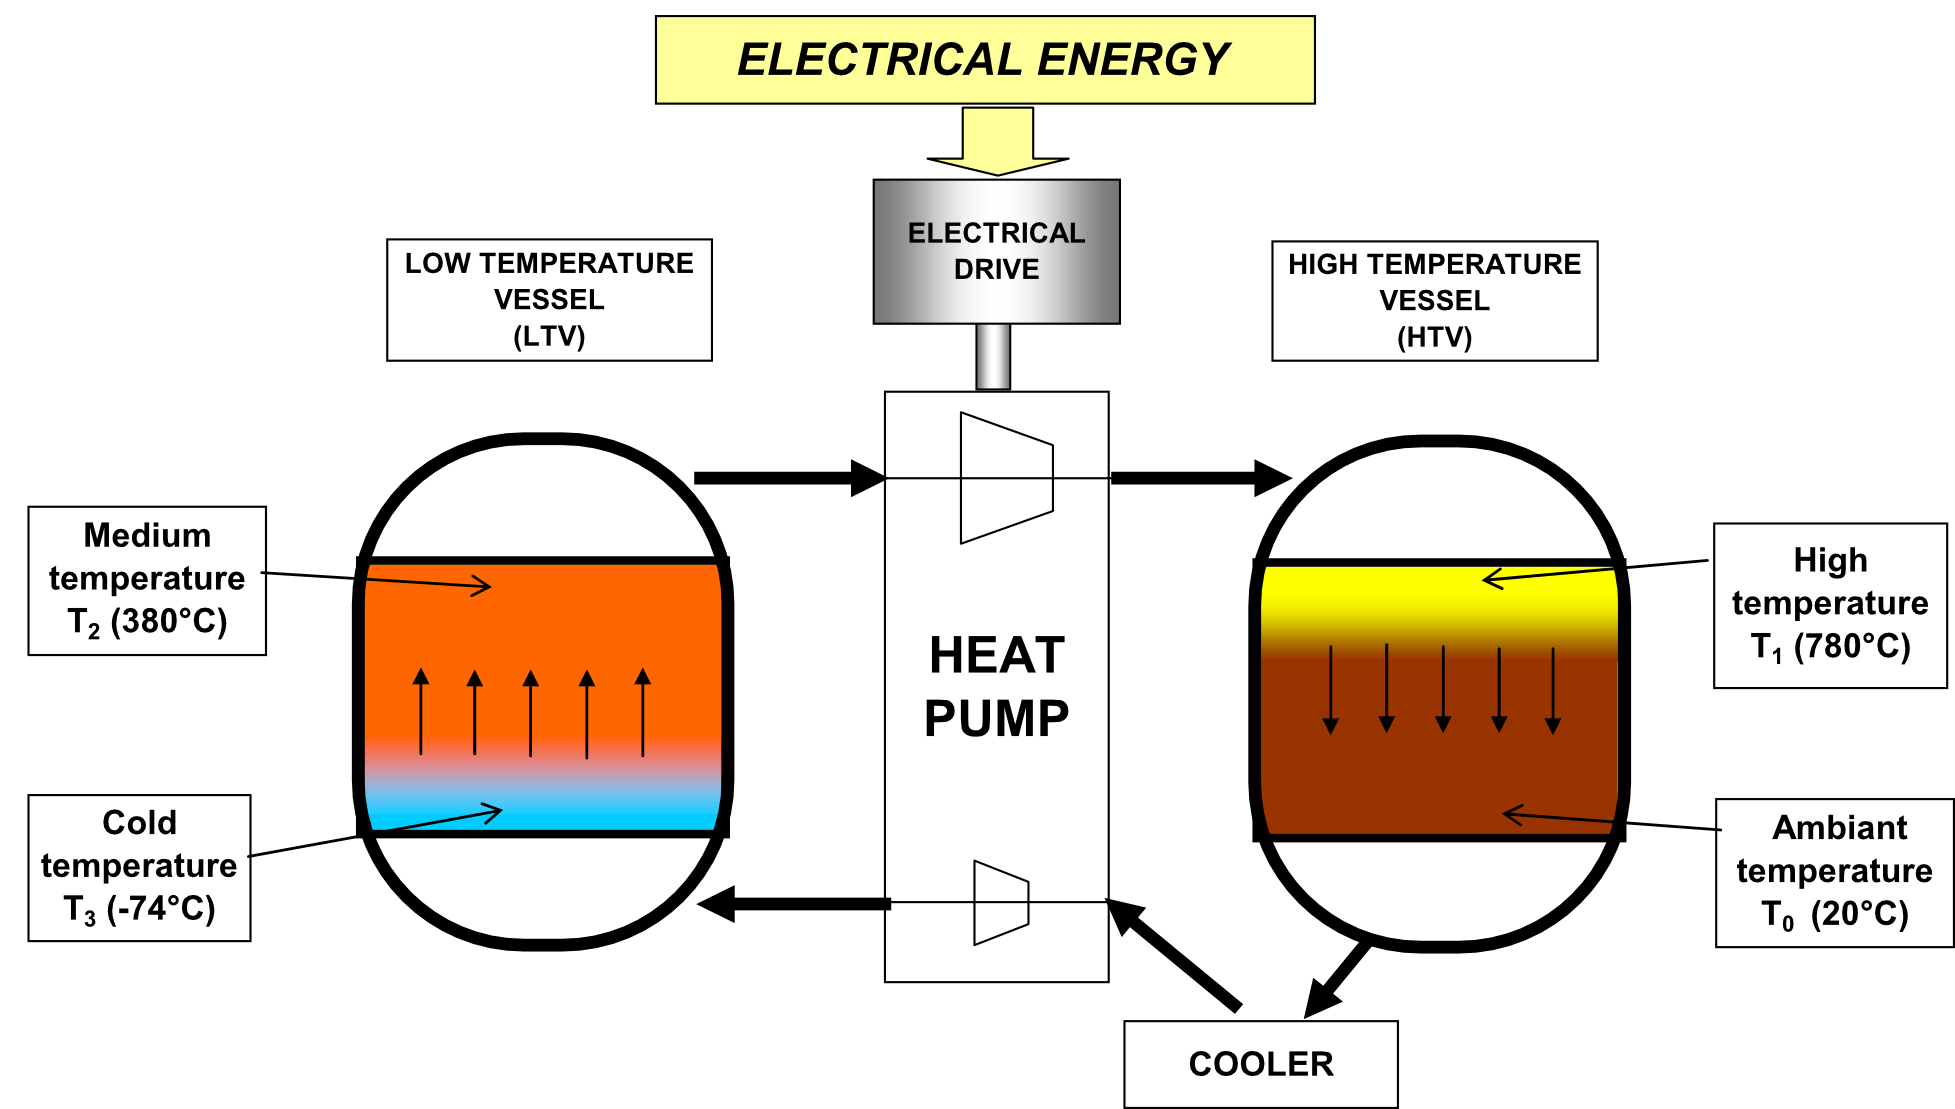 Pumped Thermal Electricity Storage